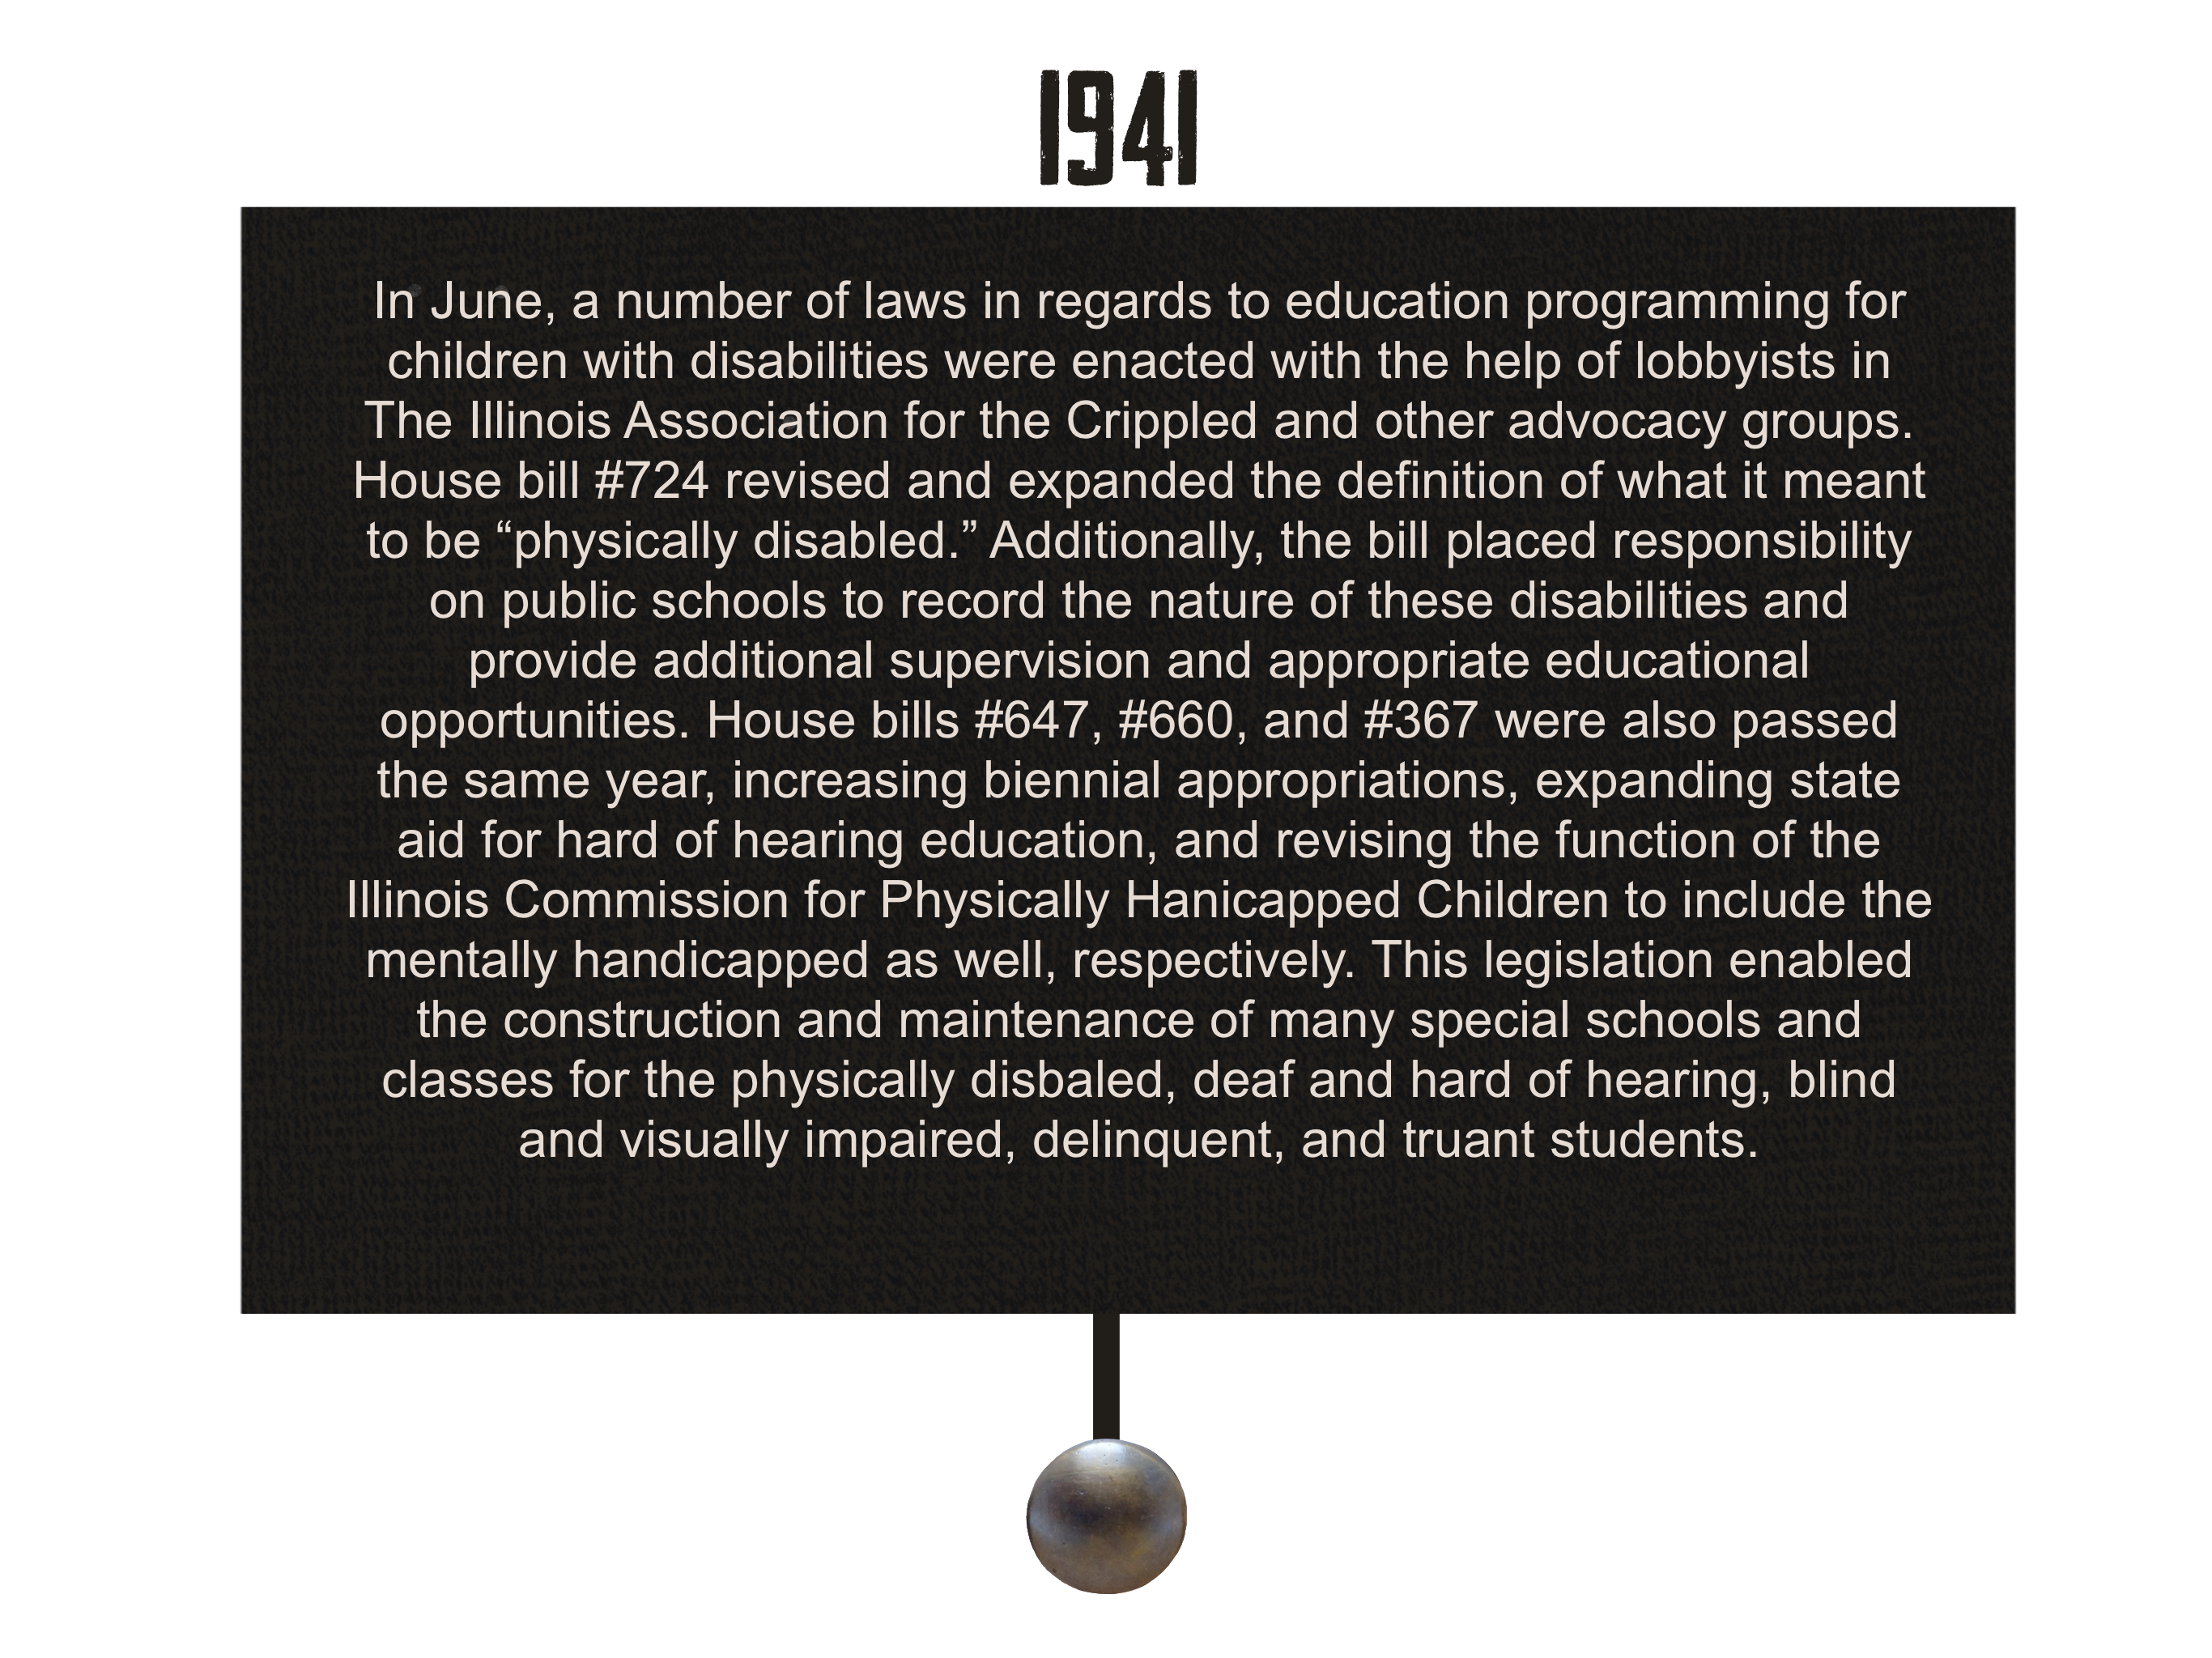 1941: In June, a number of laws in regards to education programming for children with disabilities were enacted with the help of lobbyists in The Illinois Association for the Crippled and other advocacy groups. House bill #724 revised and expanded on the definition of what it meant to be “physically disabled.” Additionally, this bill placed responsibility on public schools to record the nature of these disabilities and provide additional supervision and appropriate educational opportunities. House bills #647, #660, and #367 were also passed the same year, increasing biennial appropriations, expanding state aid for hard of hearing education, and revising the function of the Illinois Commission for Physically Hanicapped Children to include the mentally handicapped as well, respectively. This legislation enabled the construction and maintenance of many special schools and classes for the physically disbaled, deaf and hard of hearing, blind and visually impaired, delinquent, and truant students.
        